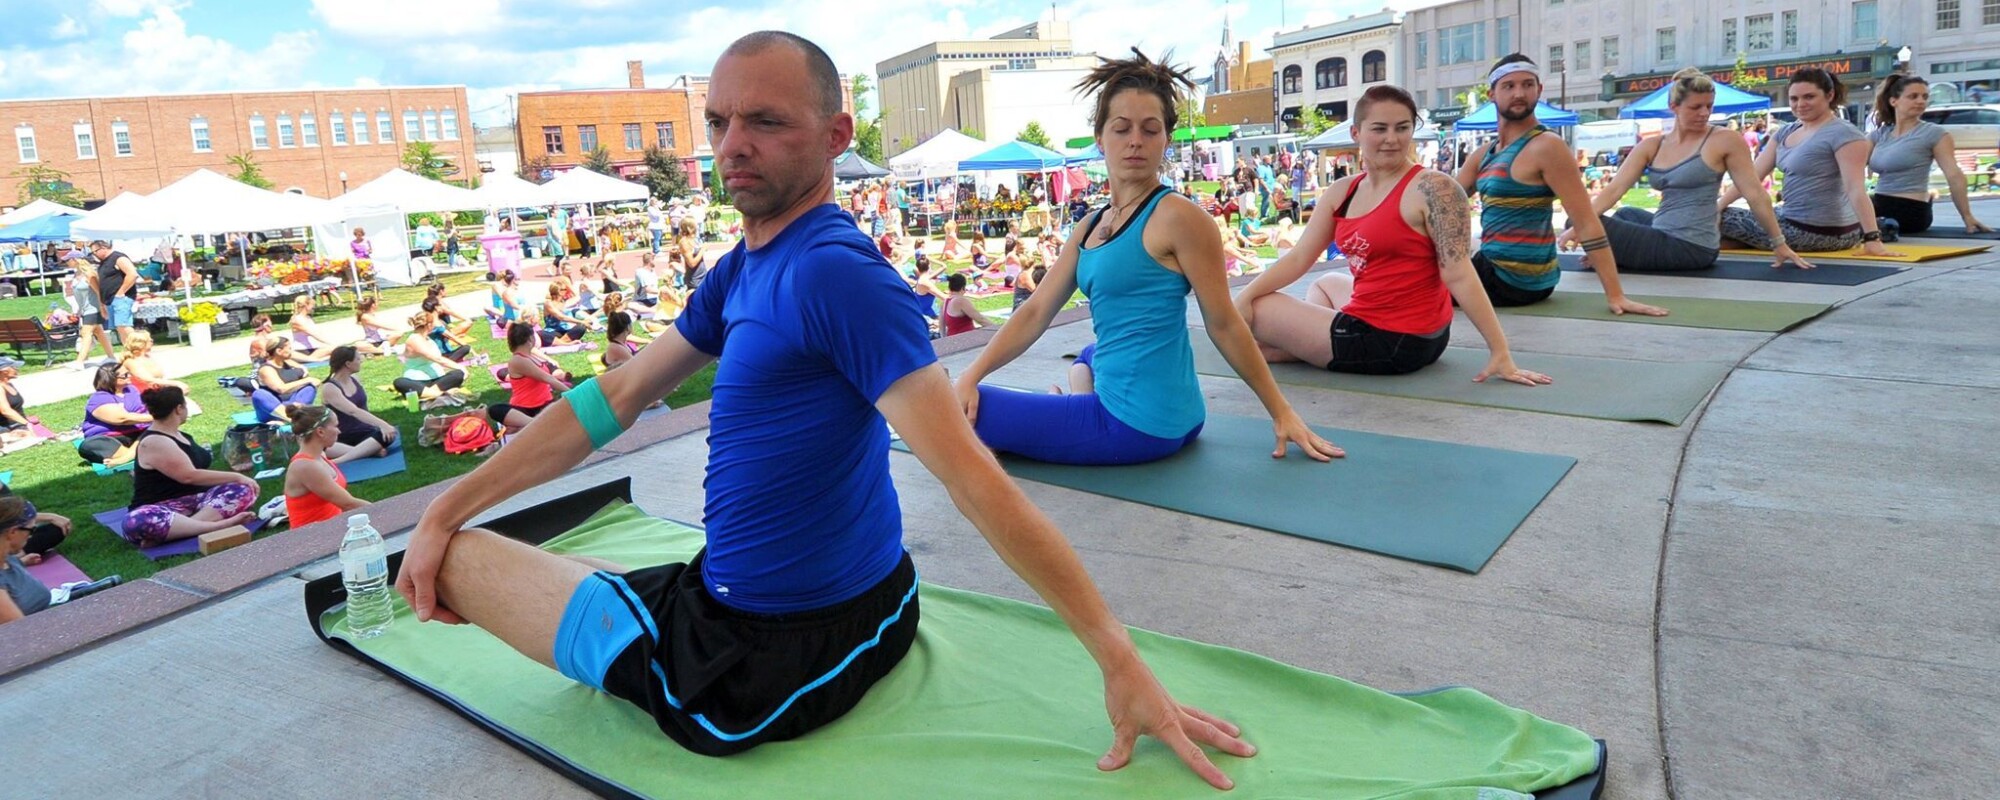 Yoga instructors lead a large group of people gathering in a central square.